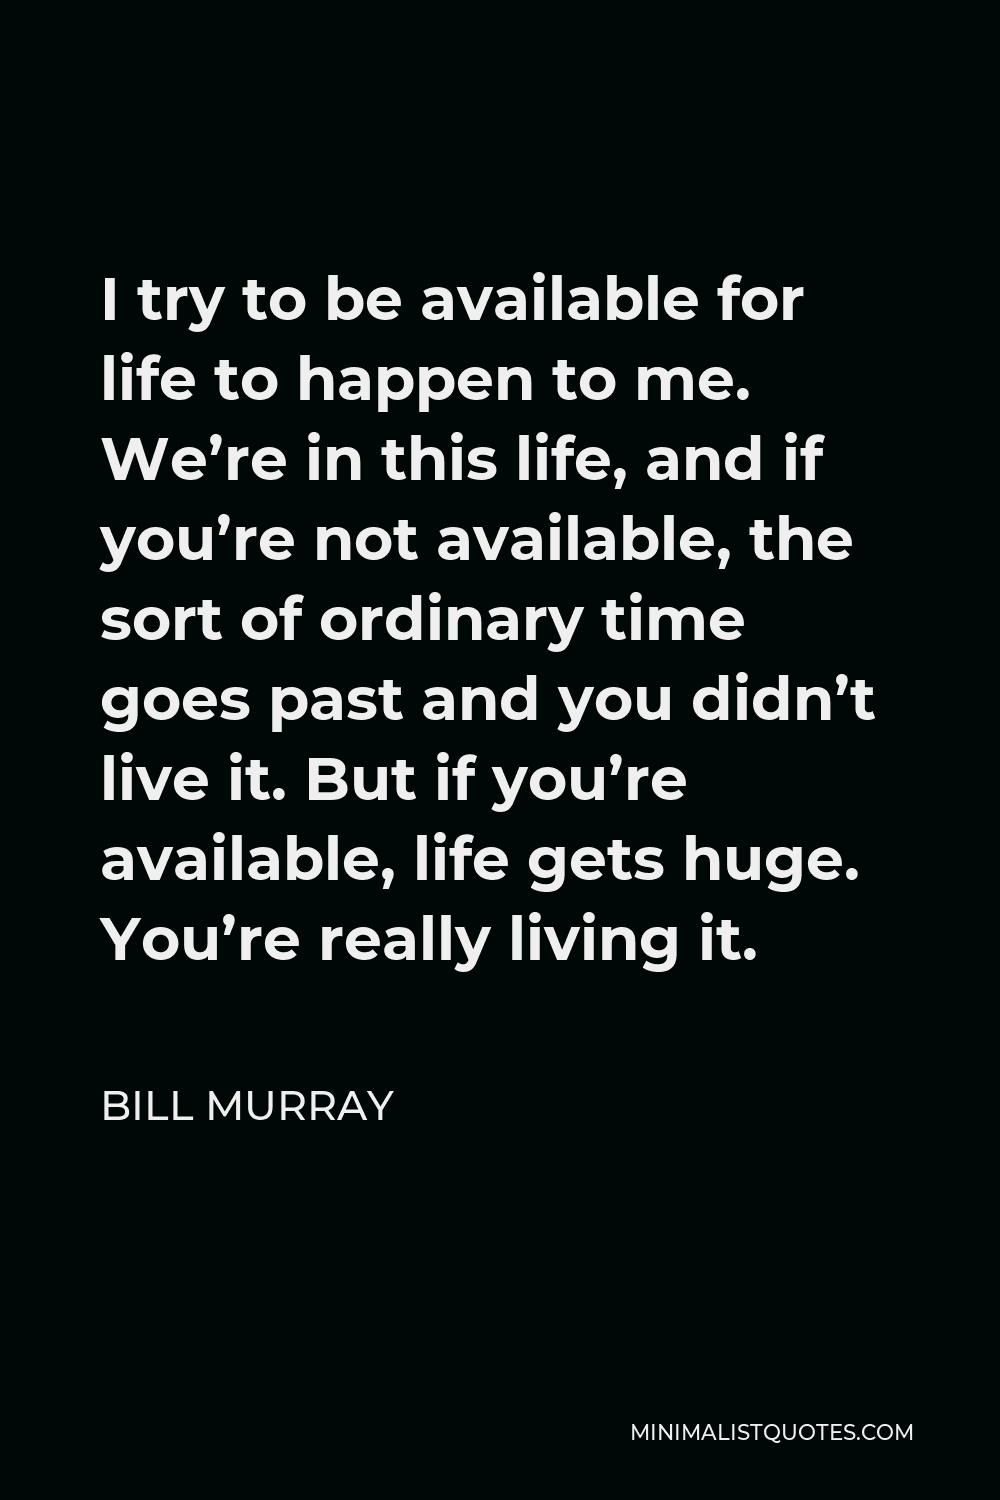 Bill Murray Quote - I try to be available for life to happen to me. We’re in this life, and if you’re not available, the sort of ordinary time goes past and you didn’t live it. But if you’re available, life gets huge. You’re really living it.